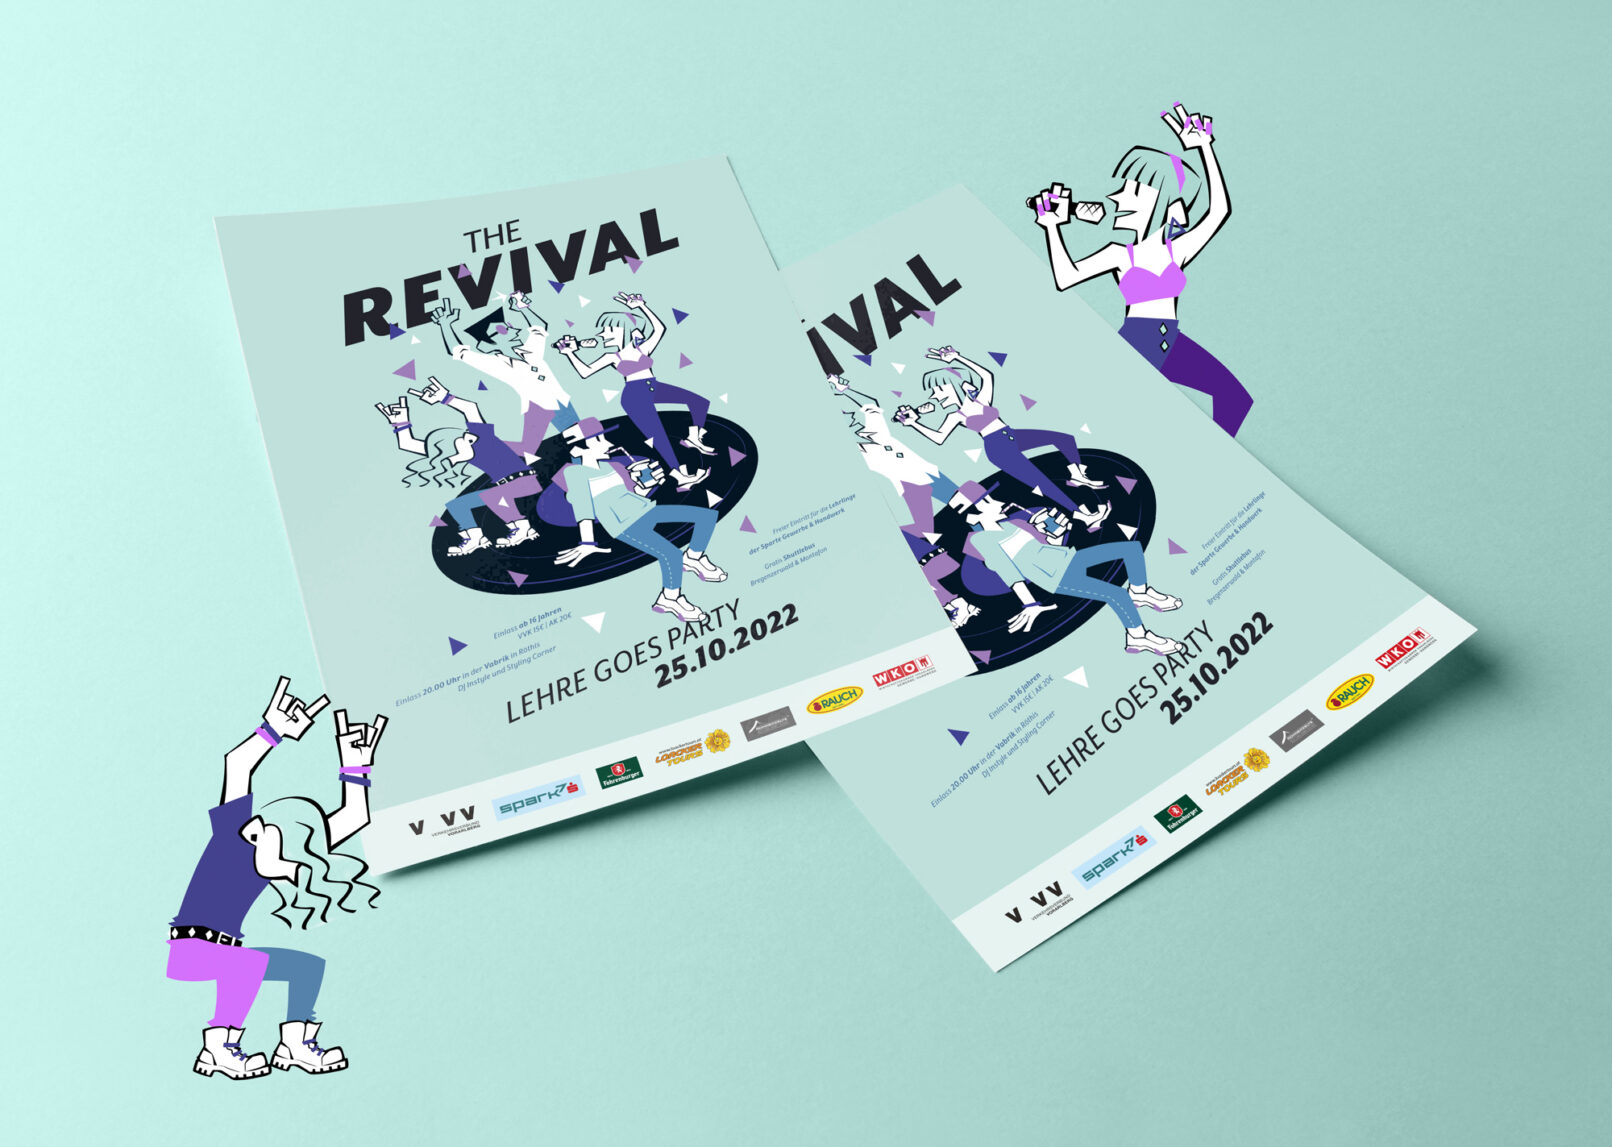 The Revival – Lehre goes Party